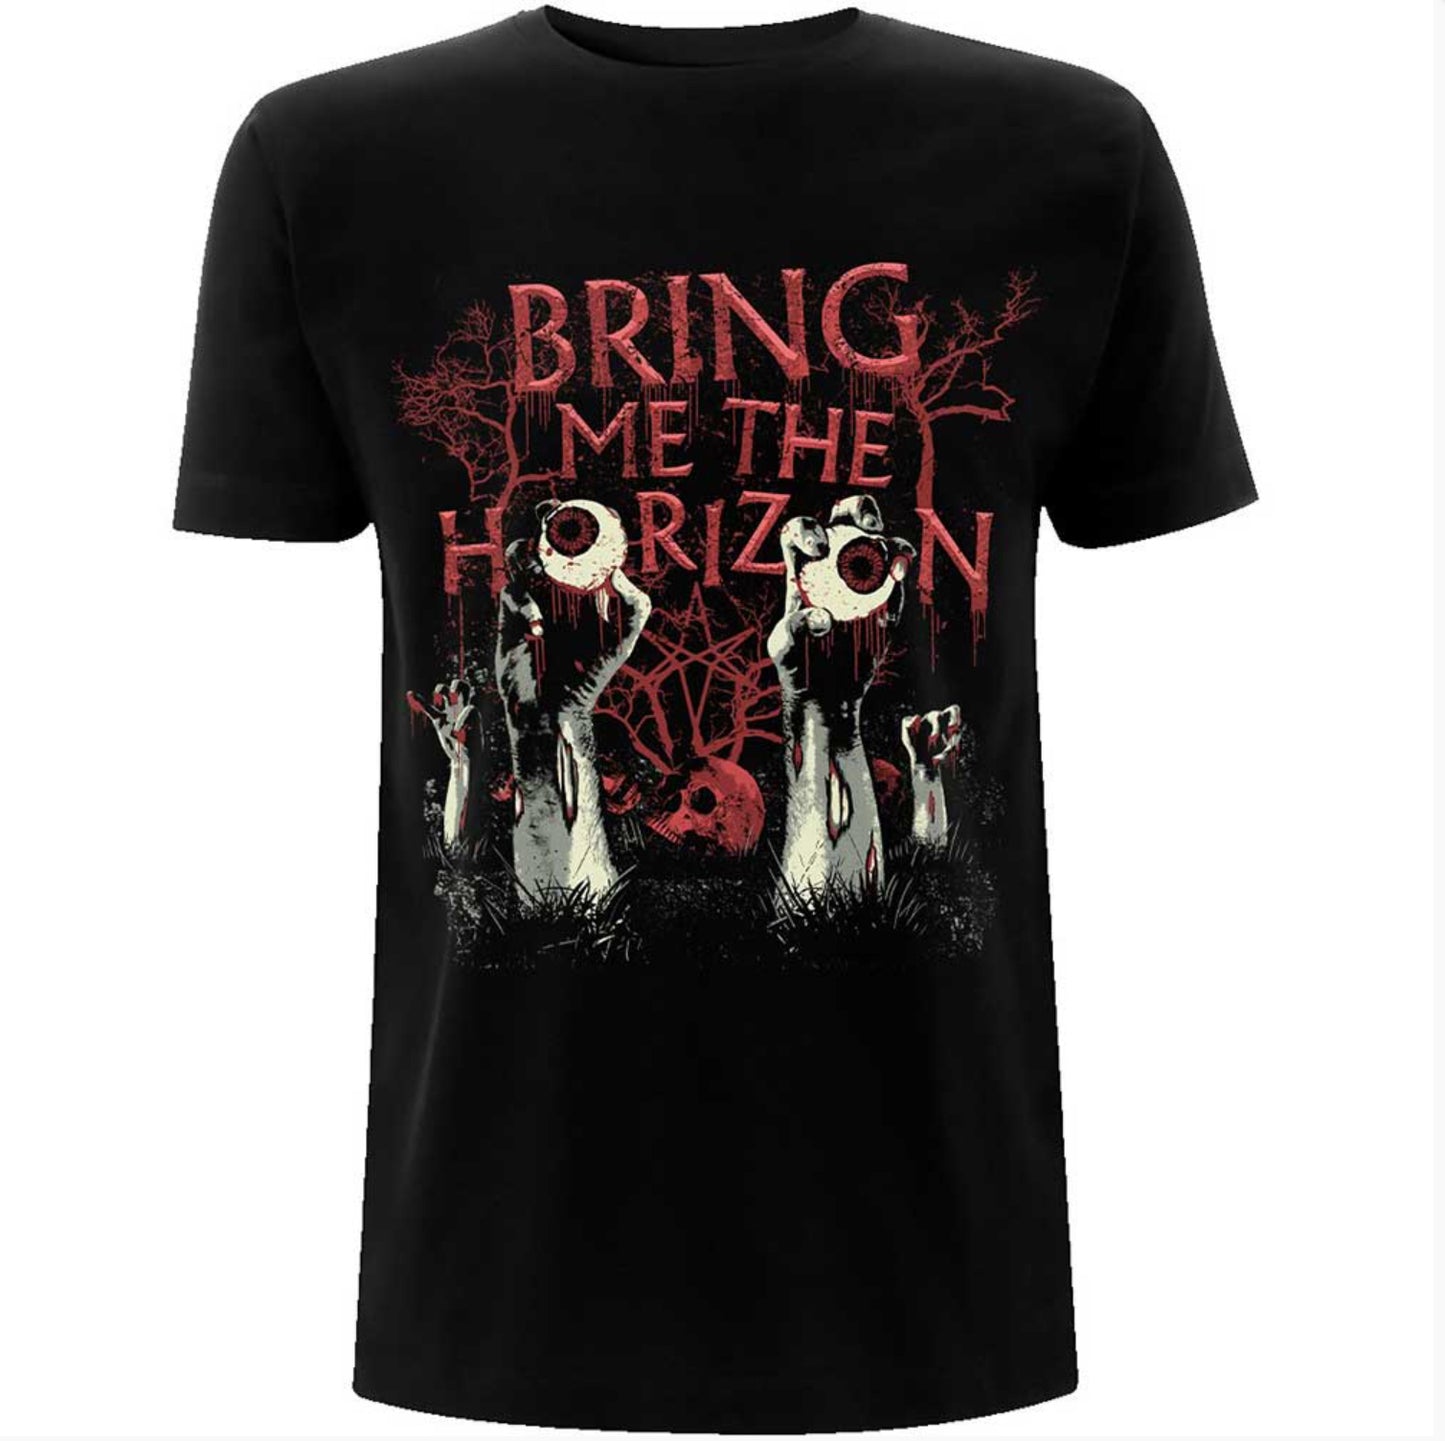 BMTH T-shirts